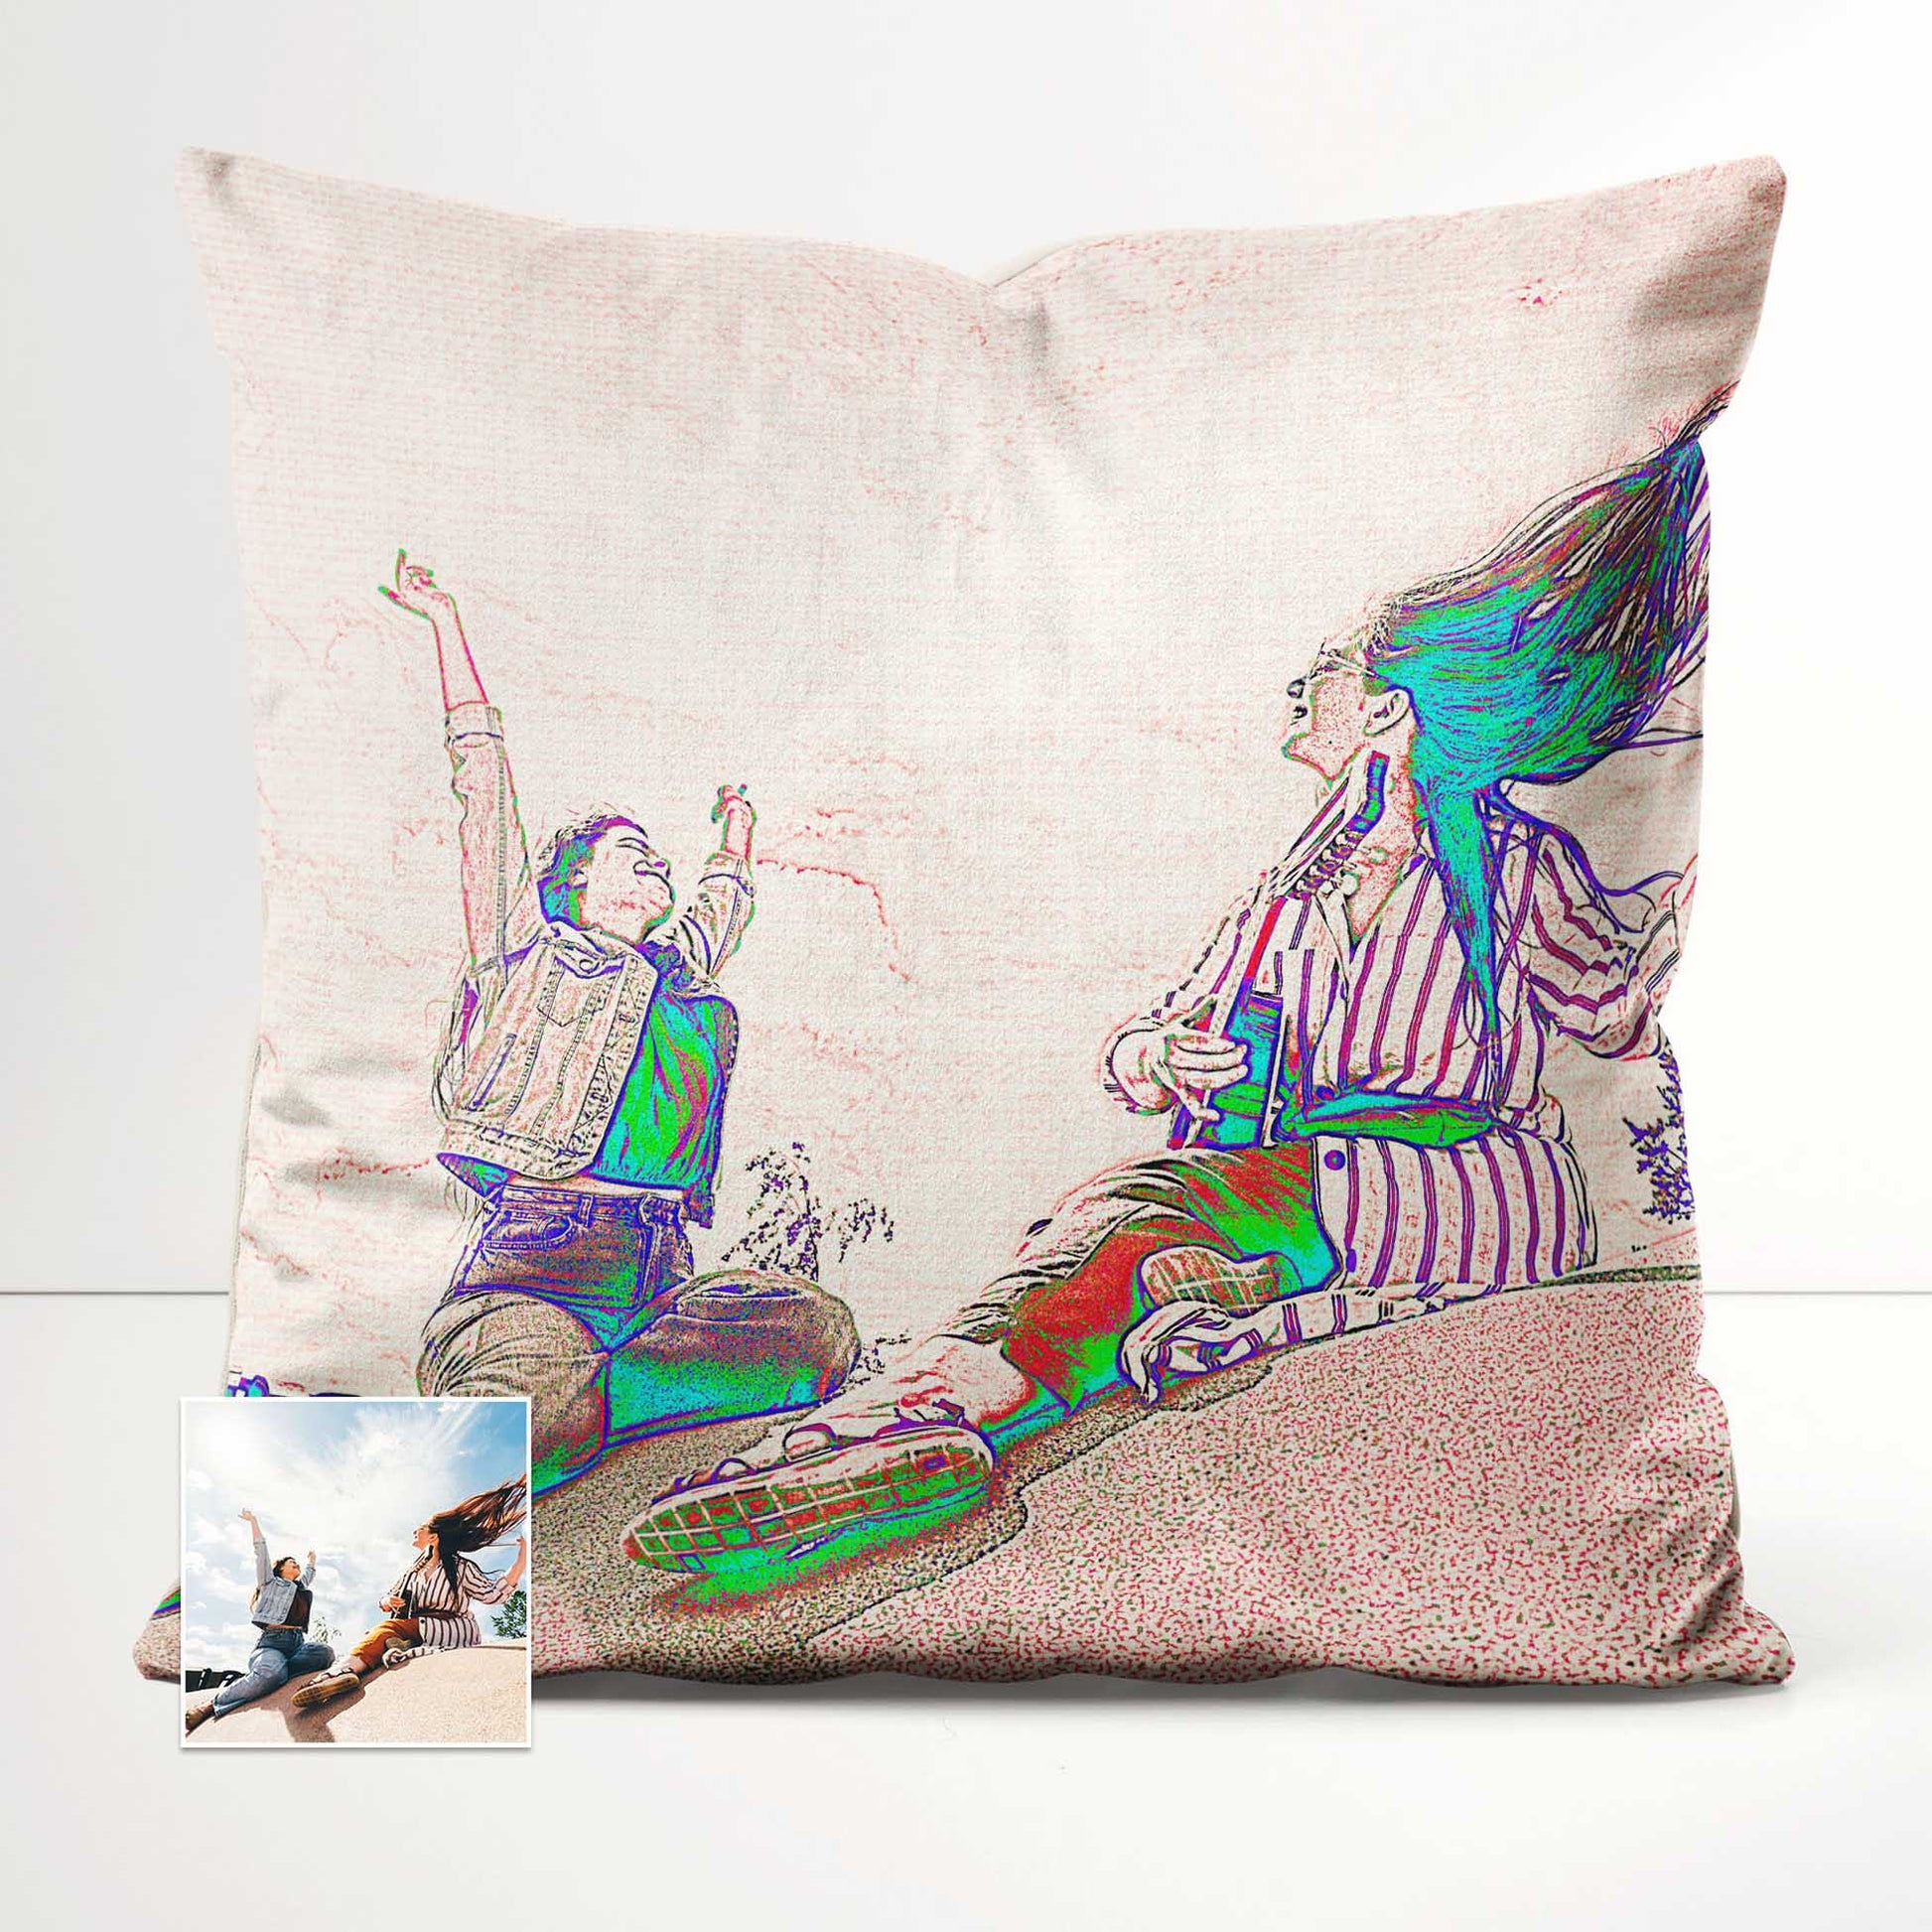 Immerse yourself in the world of art and comfort with the Personalised Pencil Drawing Cushion. Its soft velvet fabric provides a gentle touch, perfect for relaxation. Personalize it with a print from your photo 